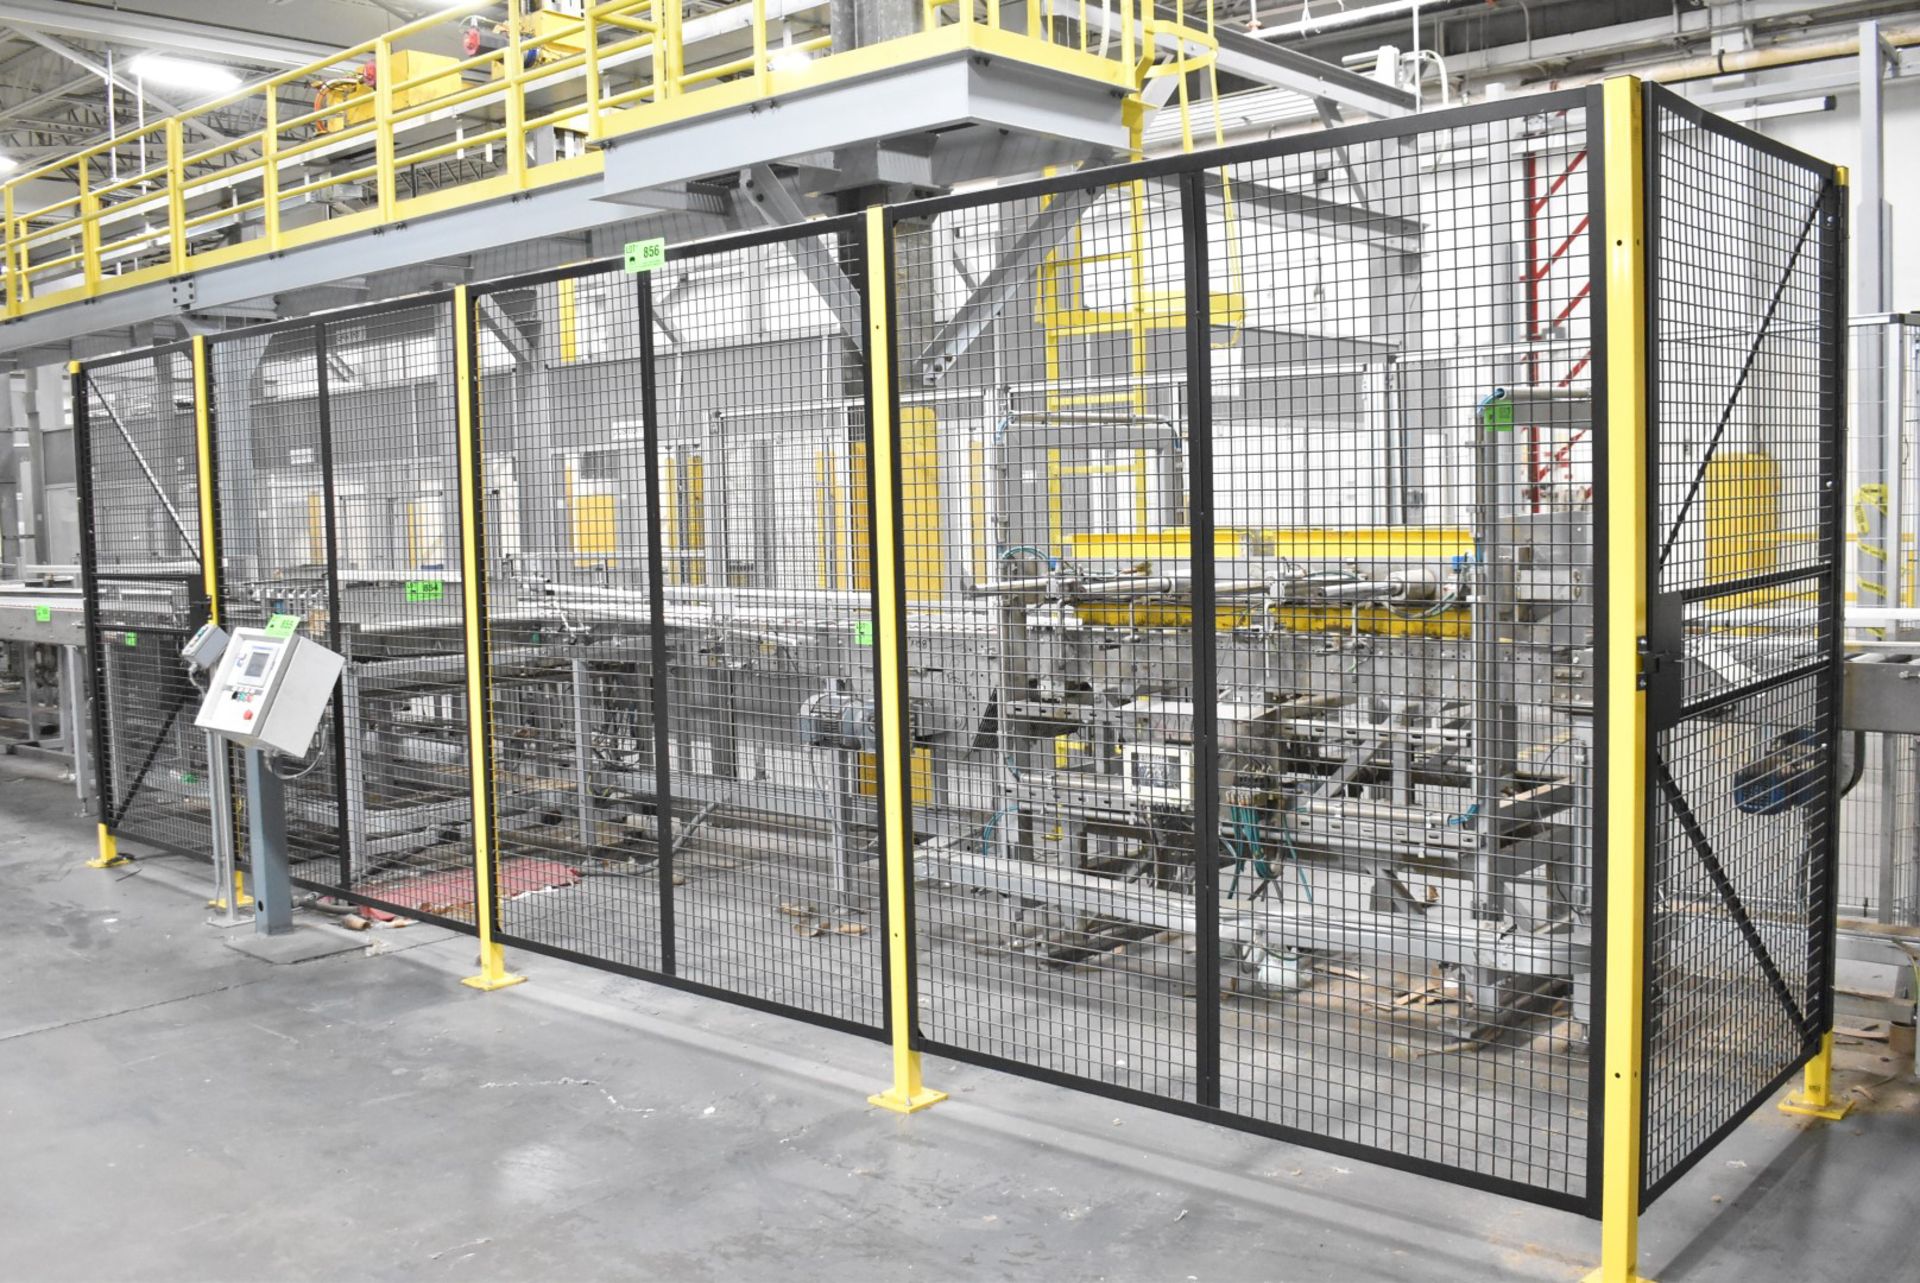 SAFETY CAGE ENCLOSURE (CI) [RIGGING FEE FOR LOT #856 - $75 USD PLUS APPLICABLE TAXES]